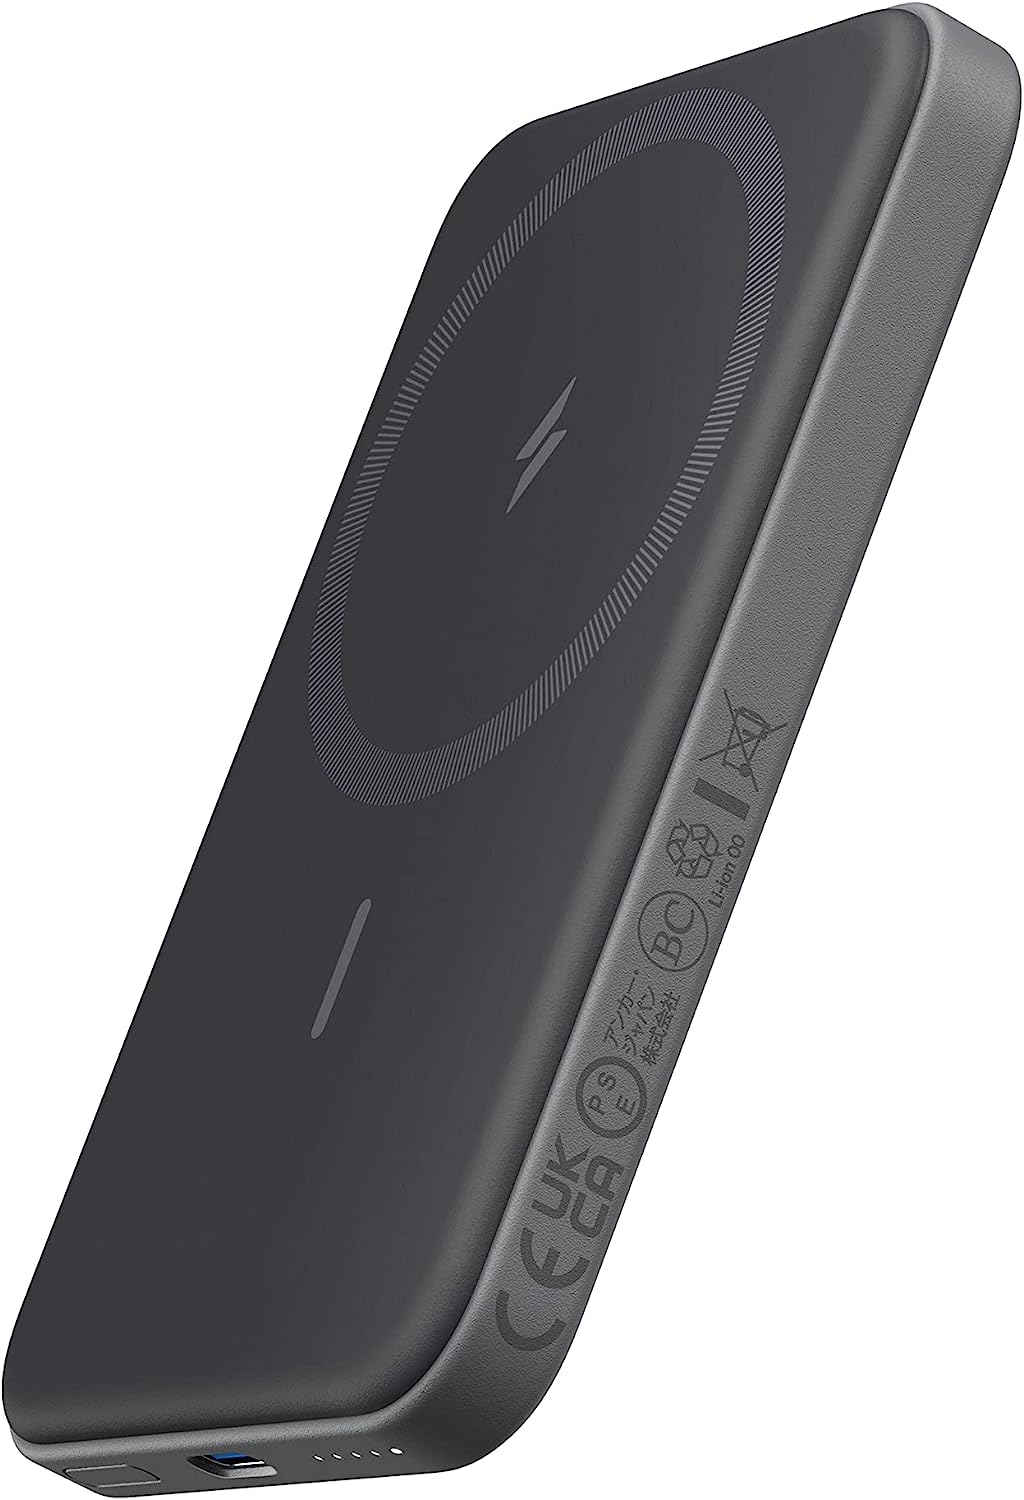 Anker 621 Magnetic Battery (MagGo), 5000mAh Magnetic Wireless Portable Charger with USB-C Cable